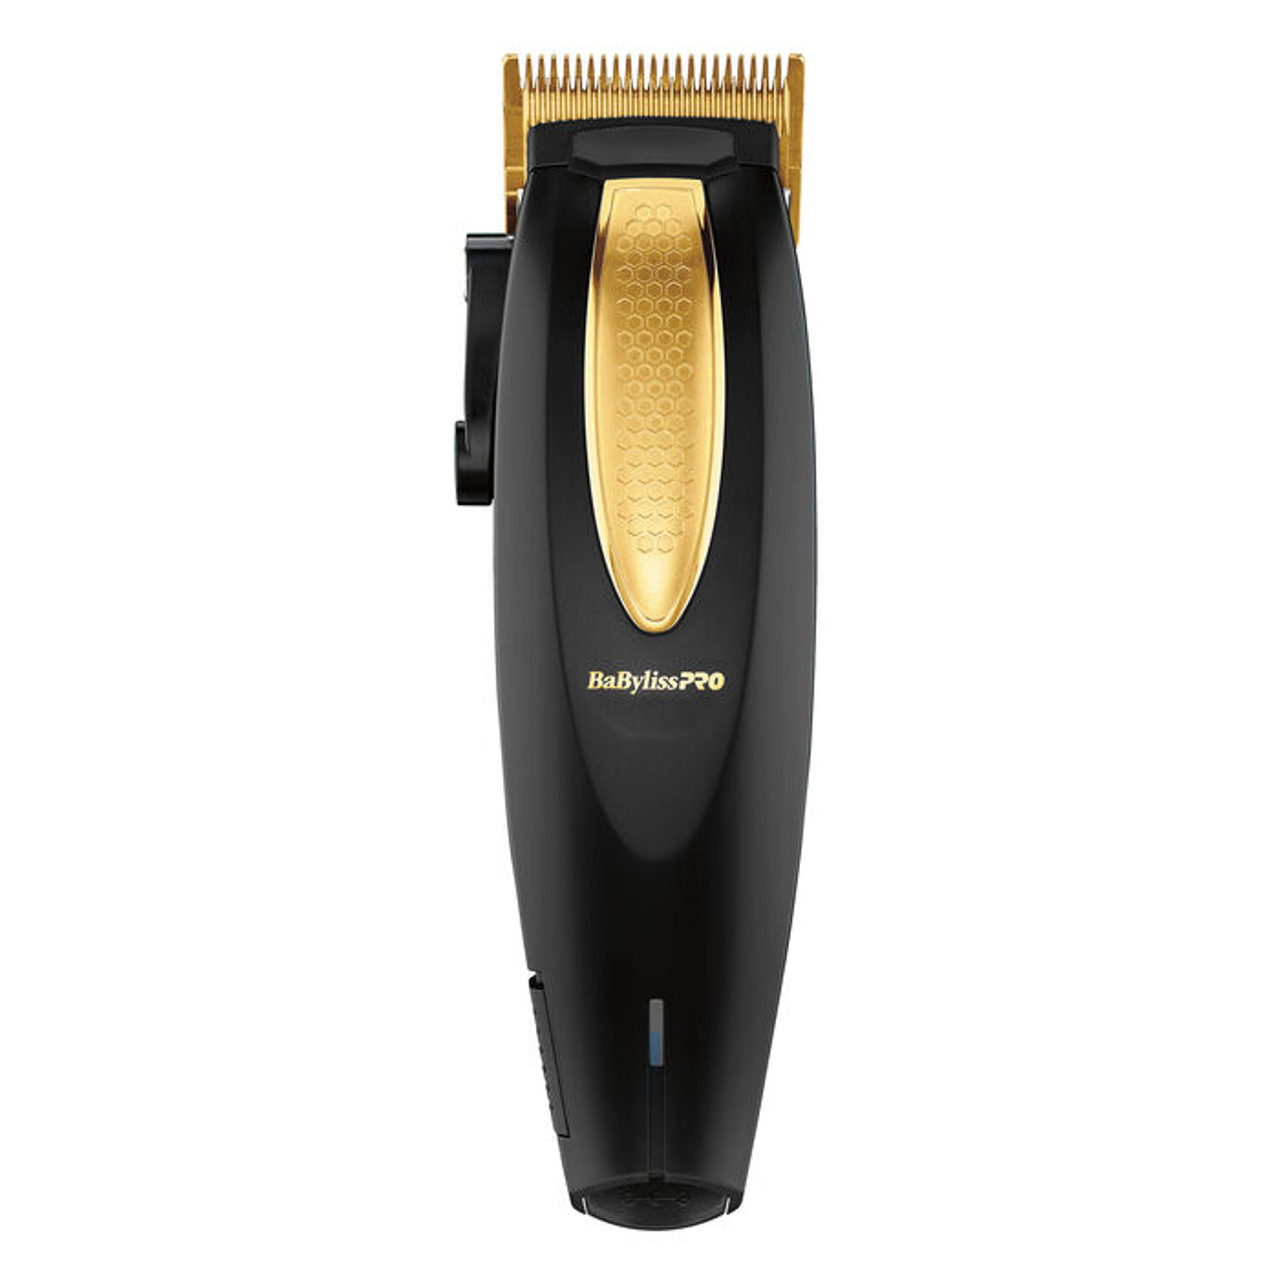 BaBylissPRO Limited Edition Gold SNAPFX Clipper